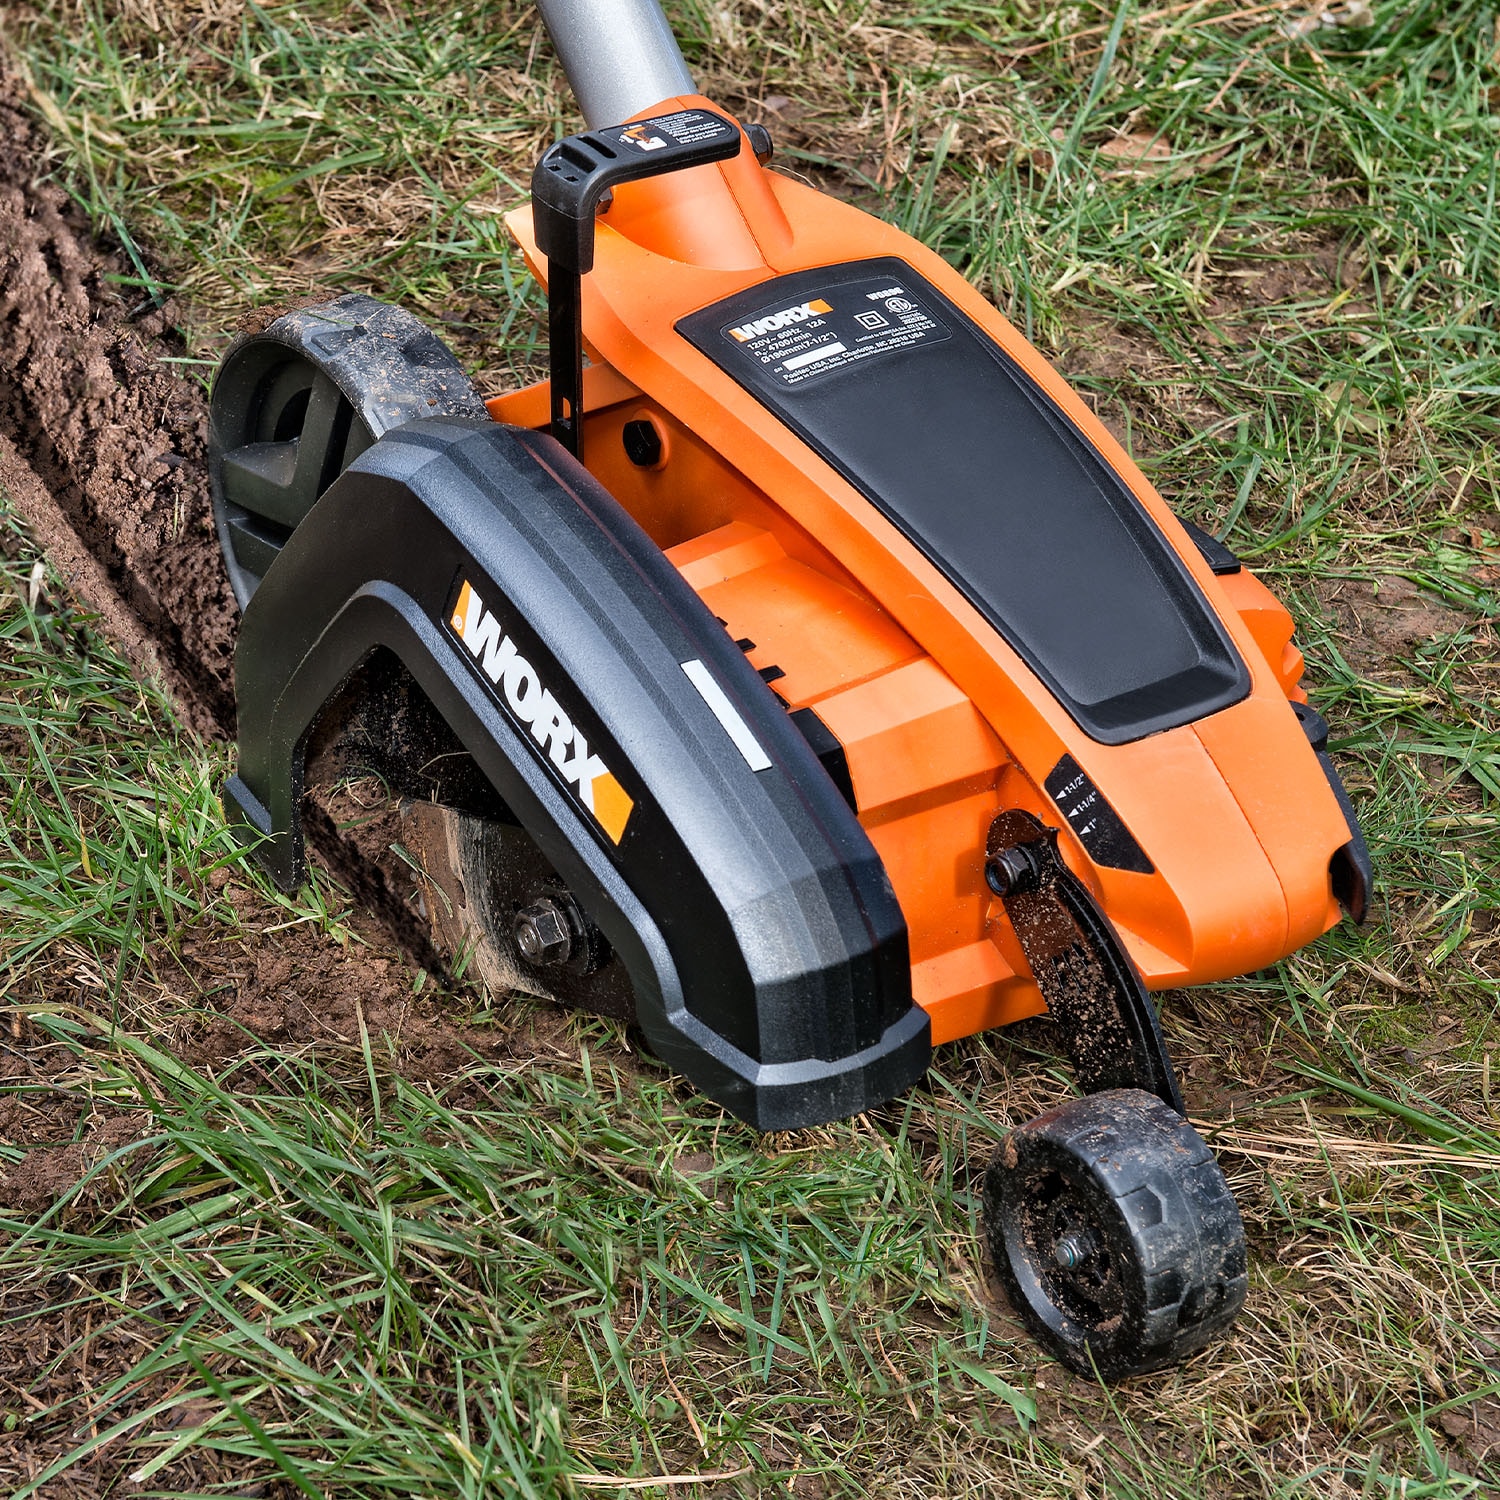 Black & Decker 7.5 in. 12-Amp Corded Electric 2-in-1 Landscape  Edger/Trencher